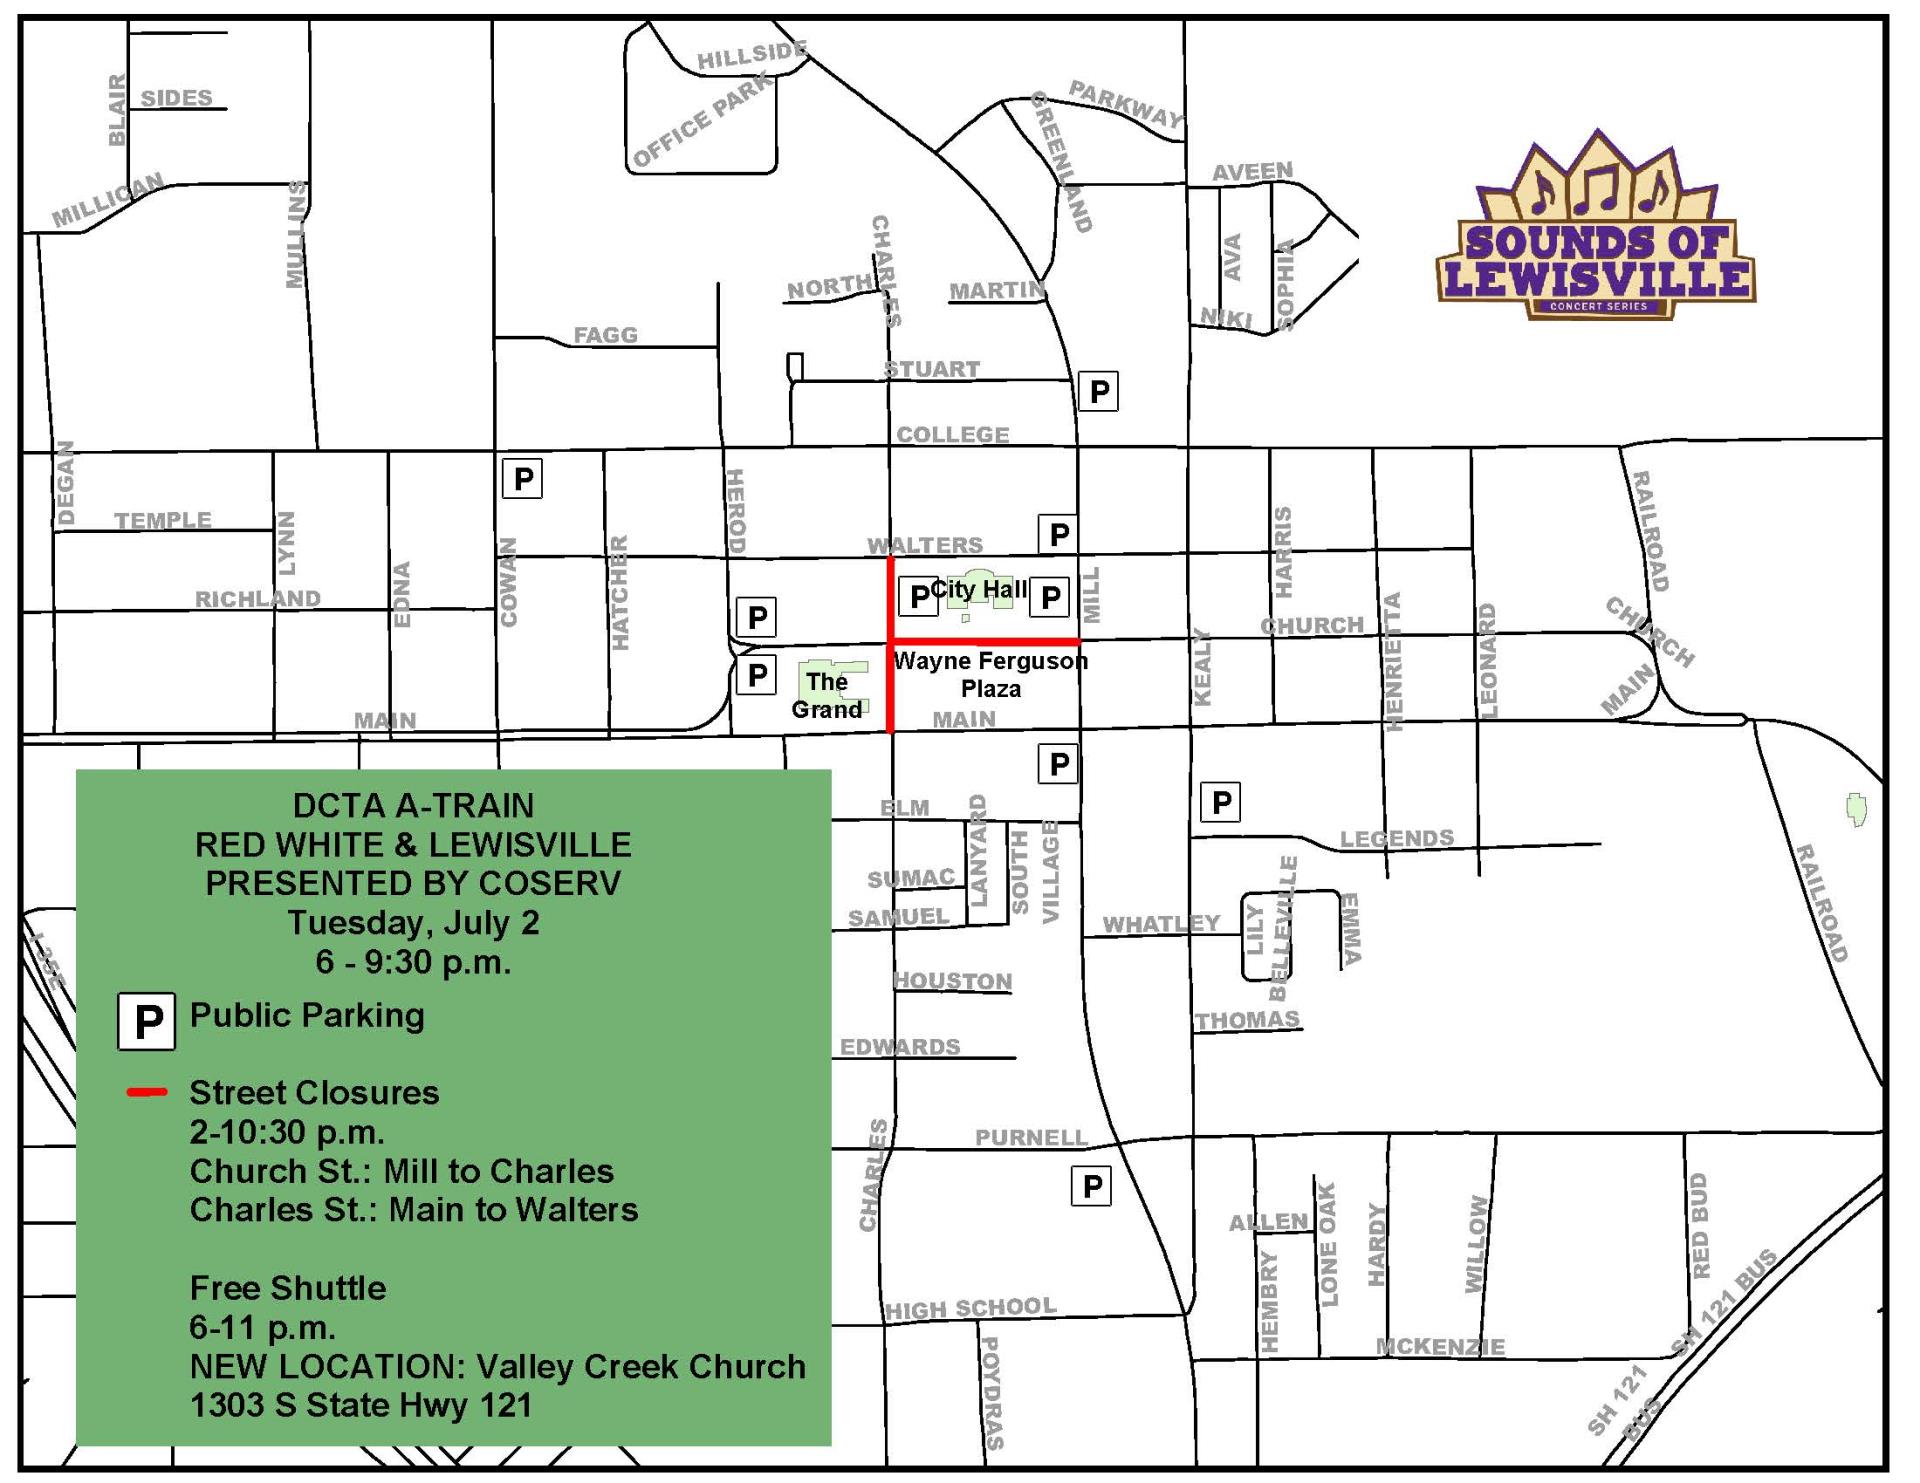 Red White and Lewisville parking and street closure map